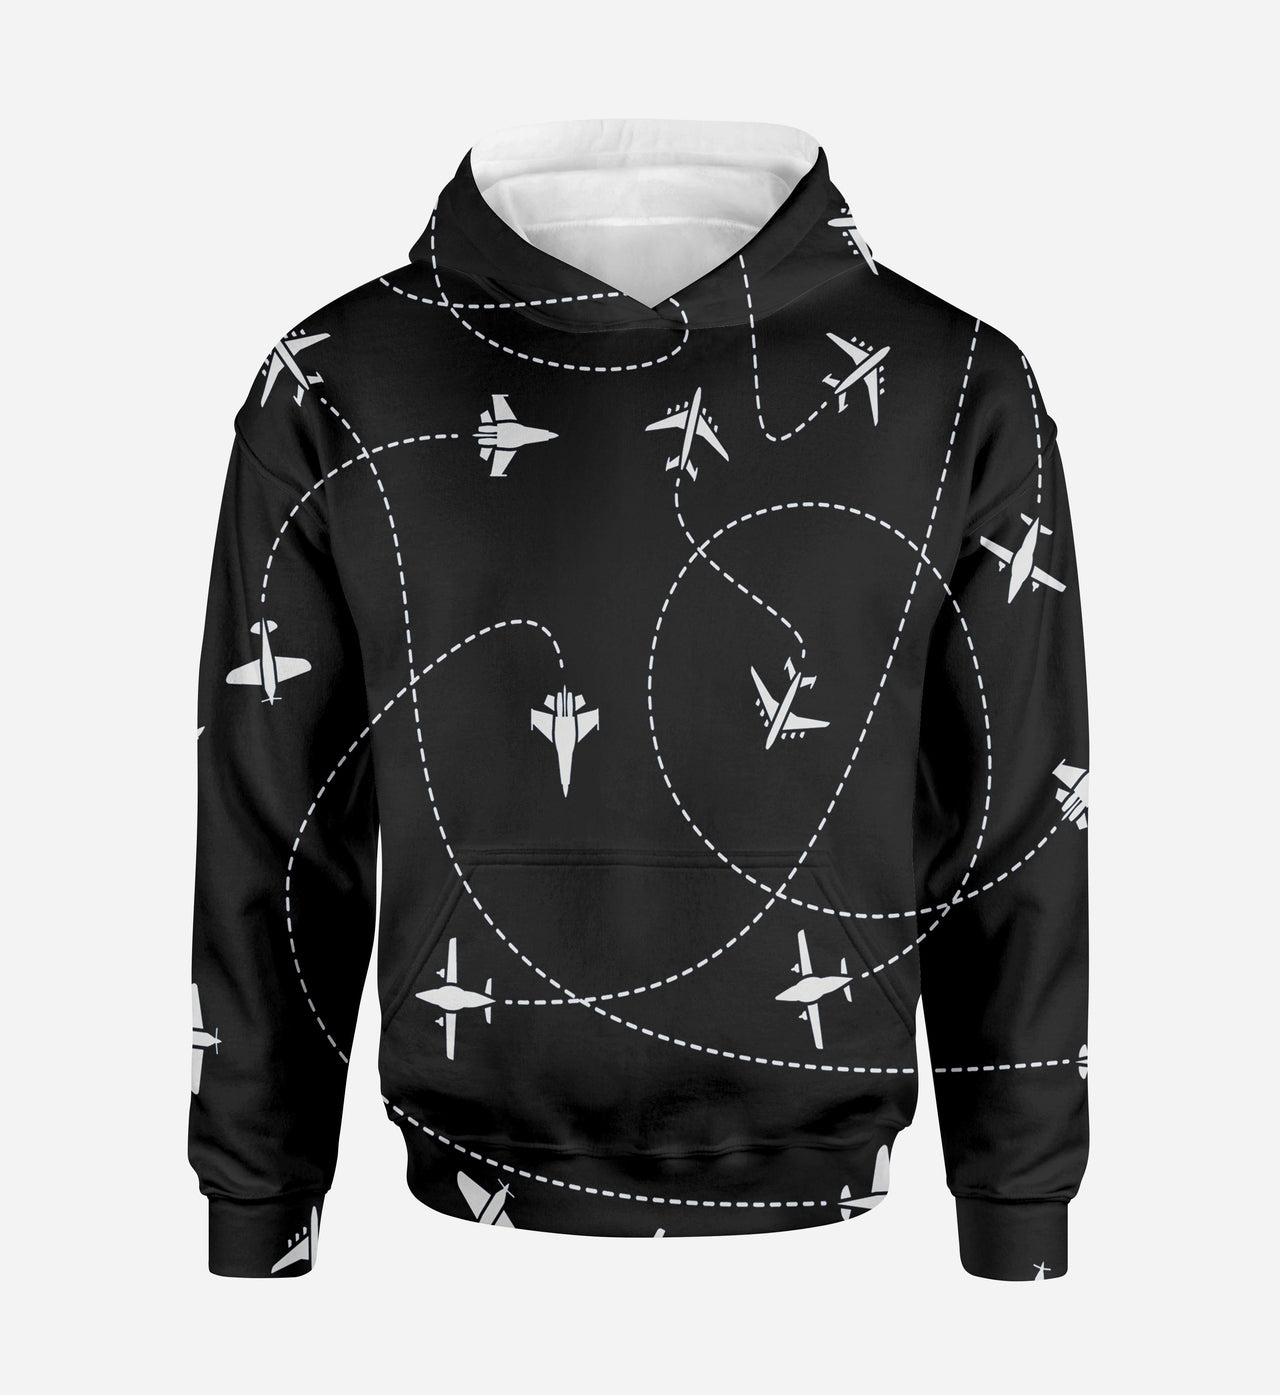 Travel The World By Plane (Black) Printed 3D Hoodies